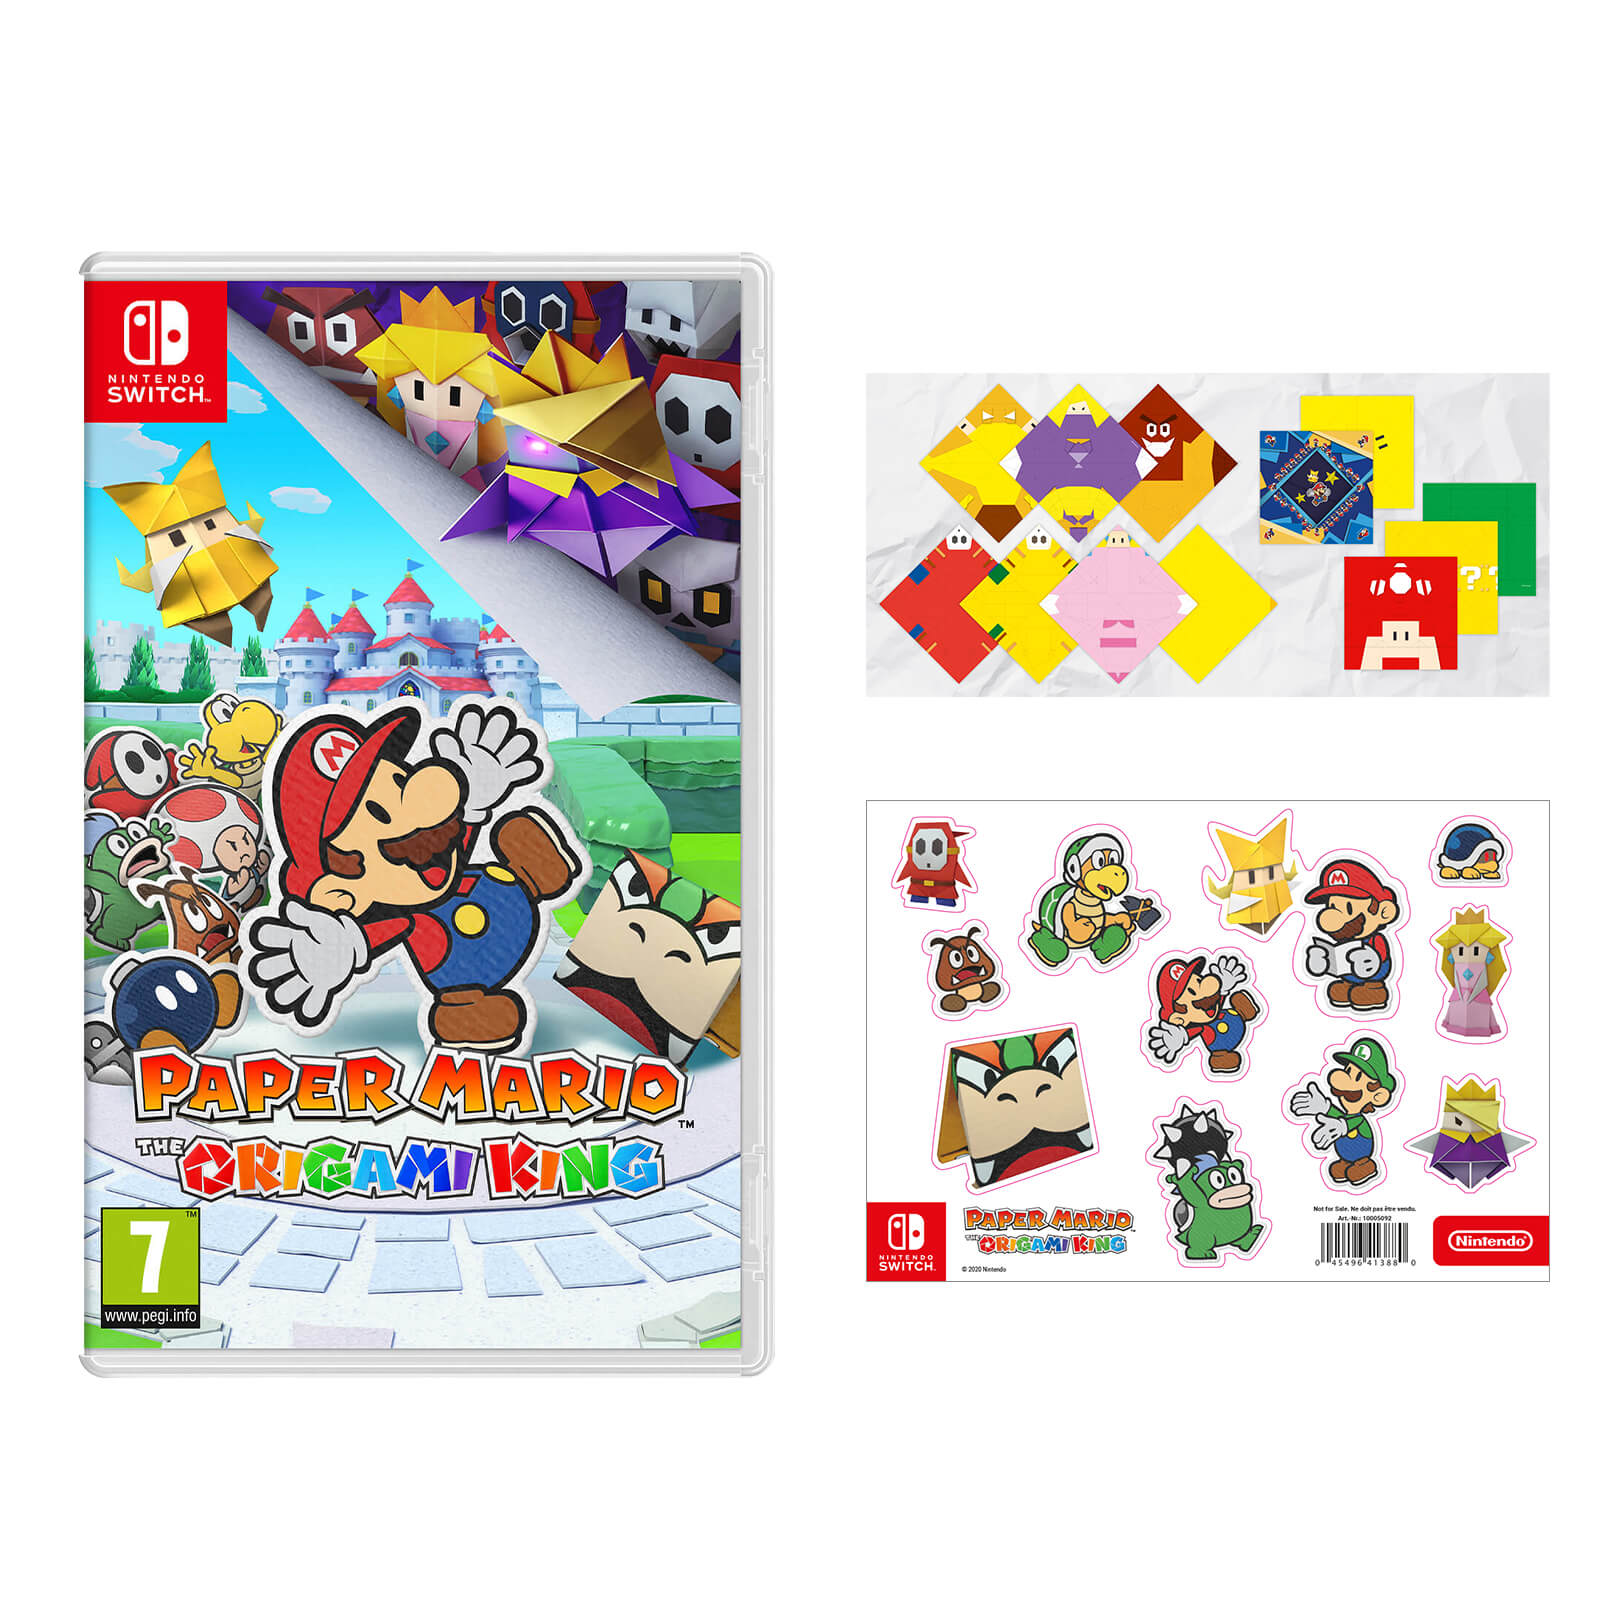 Preorder Paper Mario The Origami King on the Nintendo UK store, get